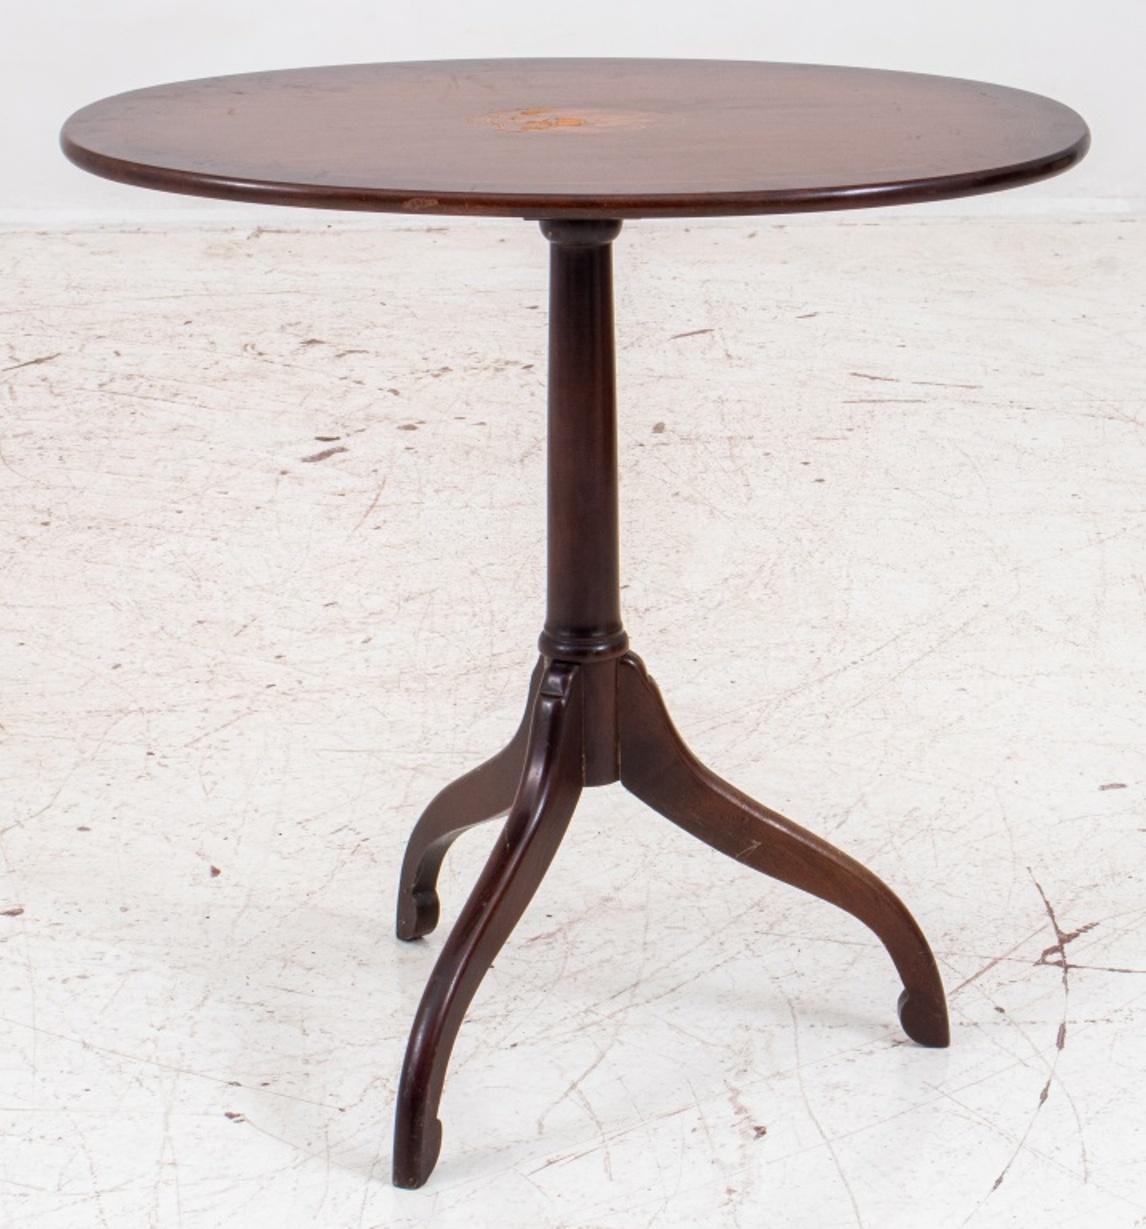 Queen Anne style mahogany tilt-top gueridon or tripod table, top enhanced with coat of arm marquetry motif with eagle.

Dimensions: 25.75